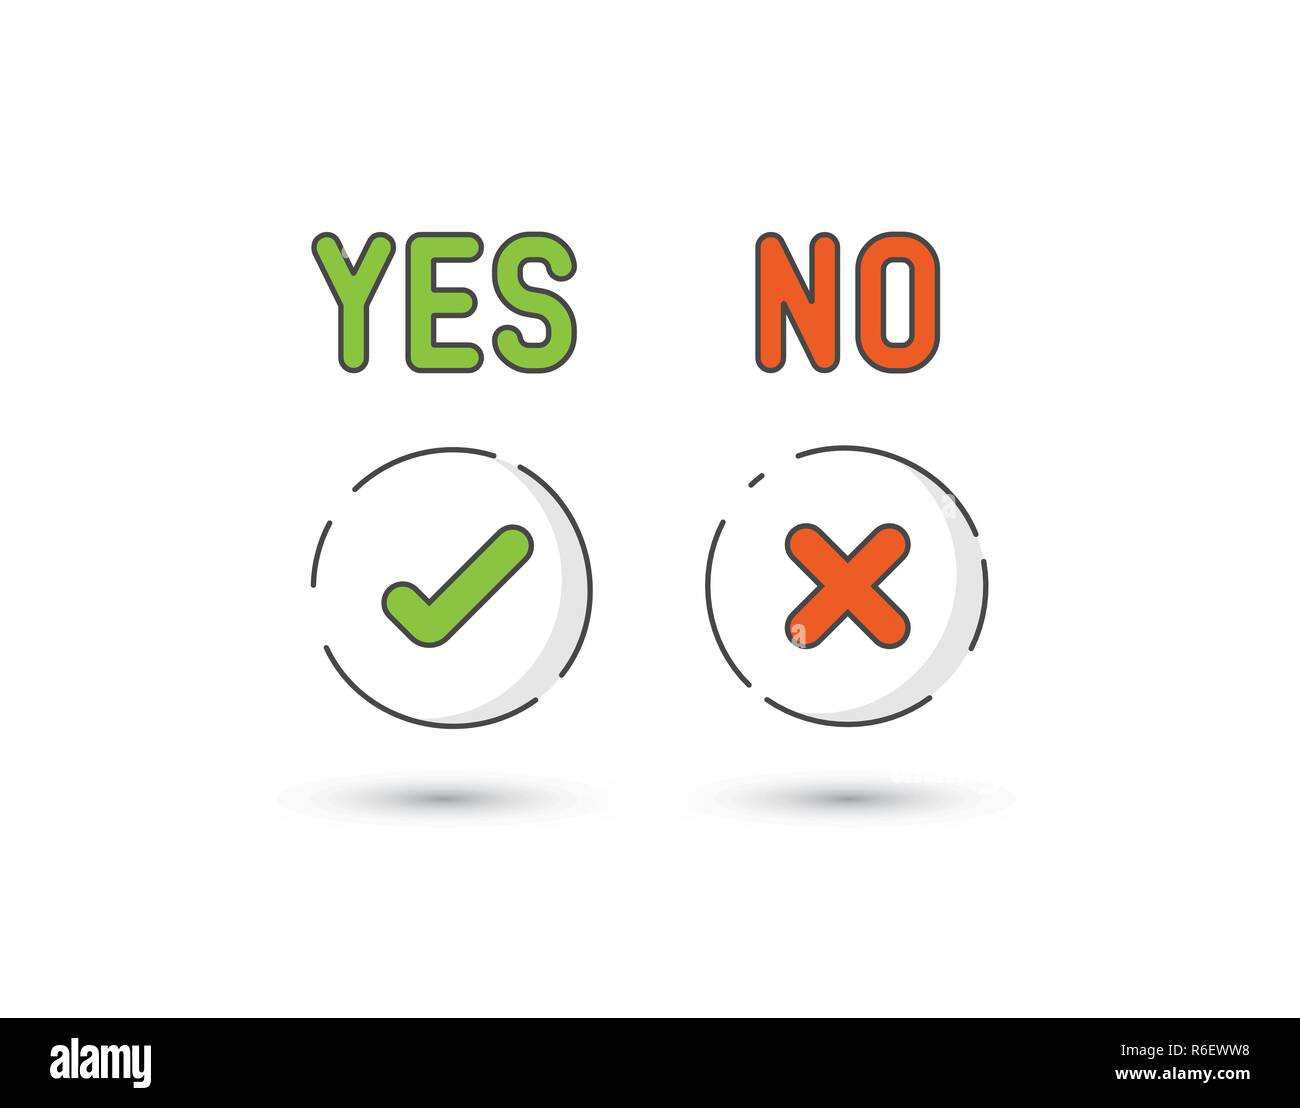 Set of fresh minimalist icons for various status - yes, no, accept, cancel Stock Vector